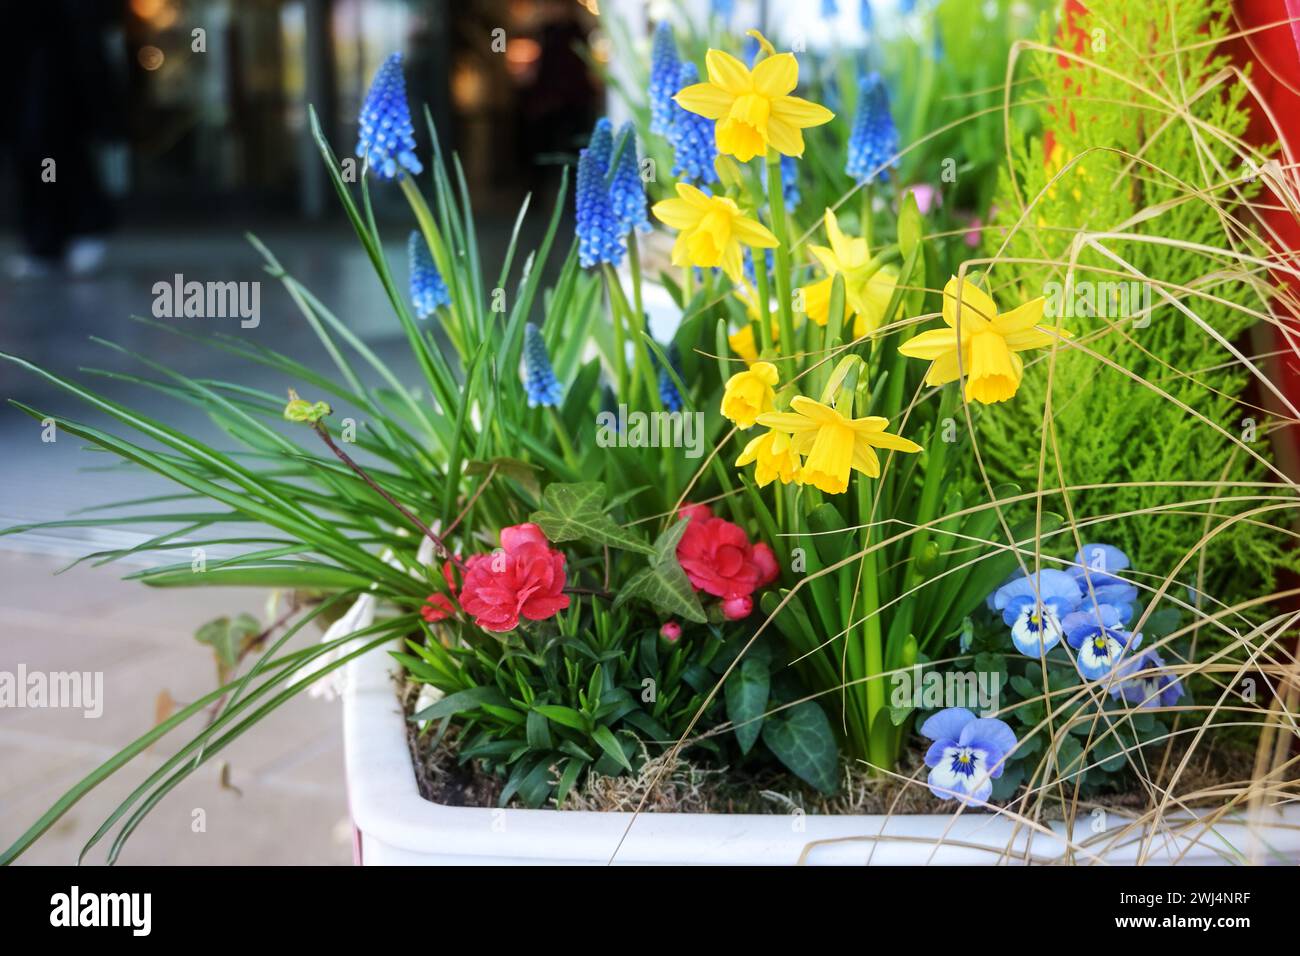 Potted spring flowers like daffodils and grape hyacinths on the street as colorful Easter decoration in the city, copy space, se Stock Photo